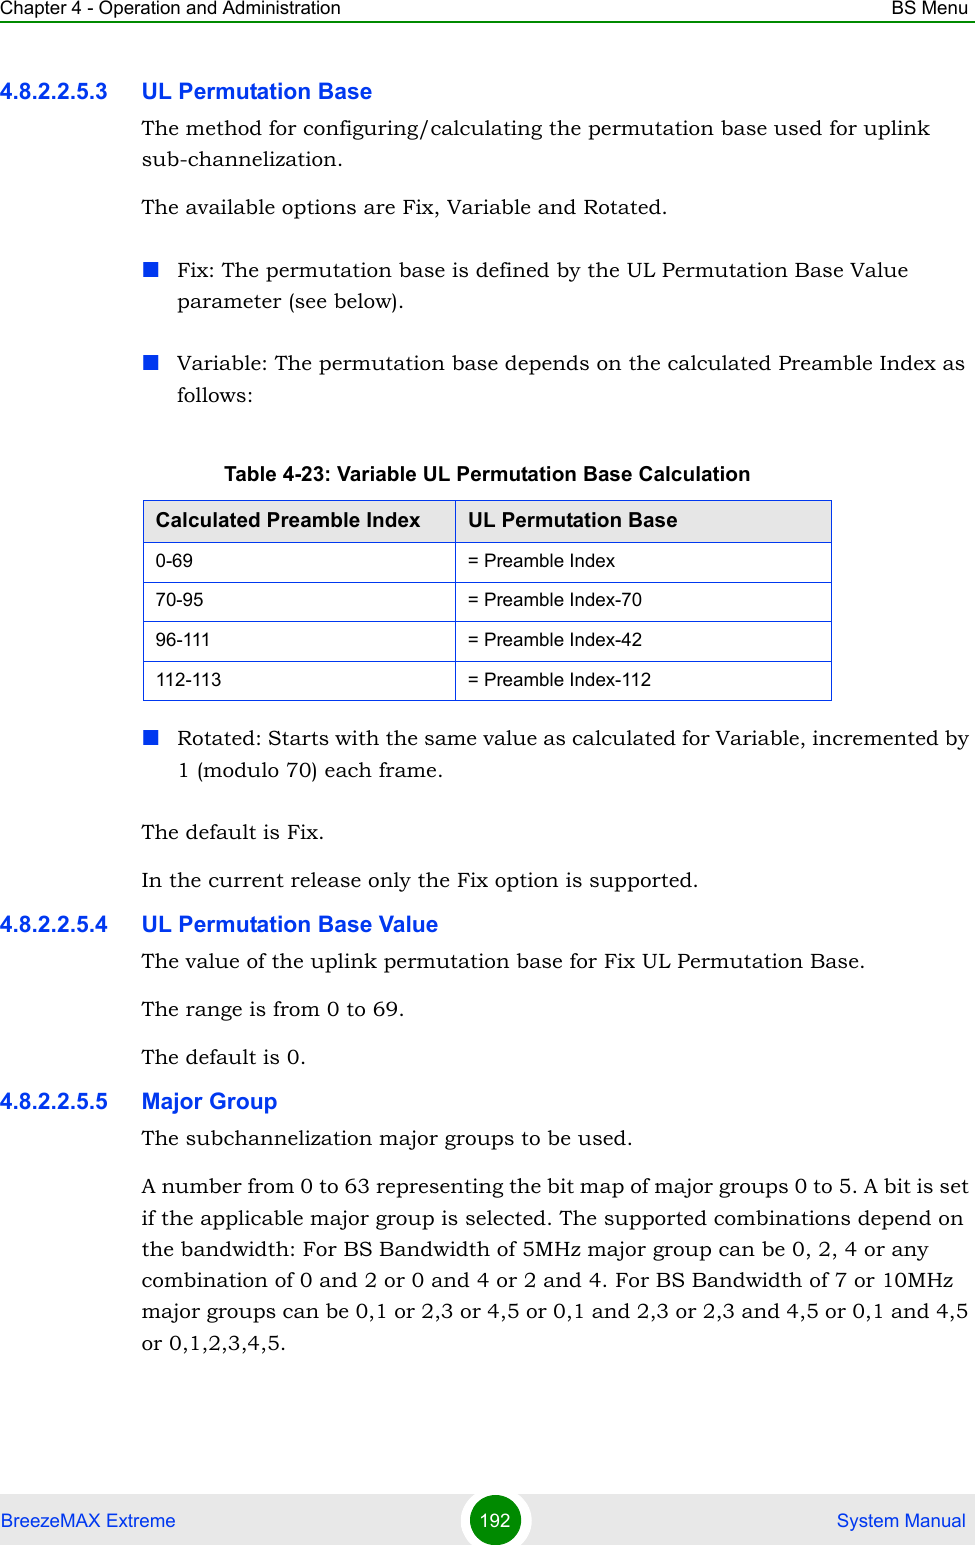 Chapter 4 - Operation and Administration BS MenuBreezeMAX Extreme 192  System Manual4.8.2.2.5.3 UL Permutation BaseThe method for configuring/calculating the permutation base used for uplink sub-channelization. The available options are Fix, Variable and Rotated.Fix: The permutation base is defined by the UL Permutation Base Value parameter (see below).Variable: The permutation base depends on the calculated Preamble Index as follows:Rotated: Starts with the same value as calculated for Variable, incremented by 1 (modulo 70) each frame.The default is Fix.In the current release only the Fix option is supported.4.8.2.2.5.4 UL Permutation Base ValueThe value of the uplink permutation base for Fix UL Permutation Base.The range is from 0 to 69.The default is 0.4.8.2.2.5.5 Major GroupThe subchannelization major groups to be used.A number from 0 to 63 representing the bit map of major groups 0 to 5. A bit is set if the applicable major group is selected. The supported combinations depend on the bandwidth: For BS Bandwidth of 5MHz major group can be 0, 2, 4 or any combination of 0 and 2 or 0 and 4 or 2 and 4. For BS Bandwidth of 7 or 10MHz major groups can be 0,1 or 2,3 or 4,5 or 0,1 and 2,3 or 2,3 and 4,5 or 0,1 and 4,5 or 0,1,2,3,4,5.Table 4-23: Variable UL Permutation Base CalculationCalculated Preamble Index UL Permutation Base0-69 = Preamble Index70-95 = Preamble Index-7096-111 = Preamble Index-42112-113 = Preamble Index-112